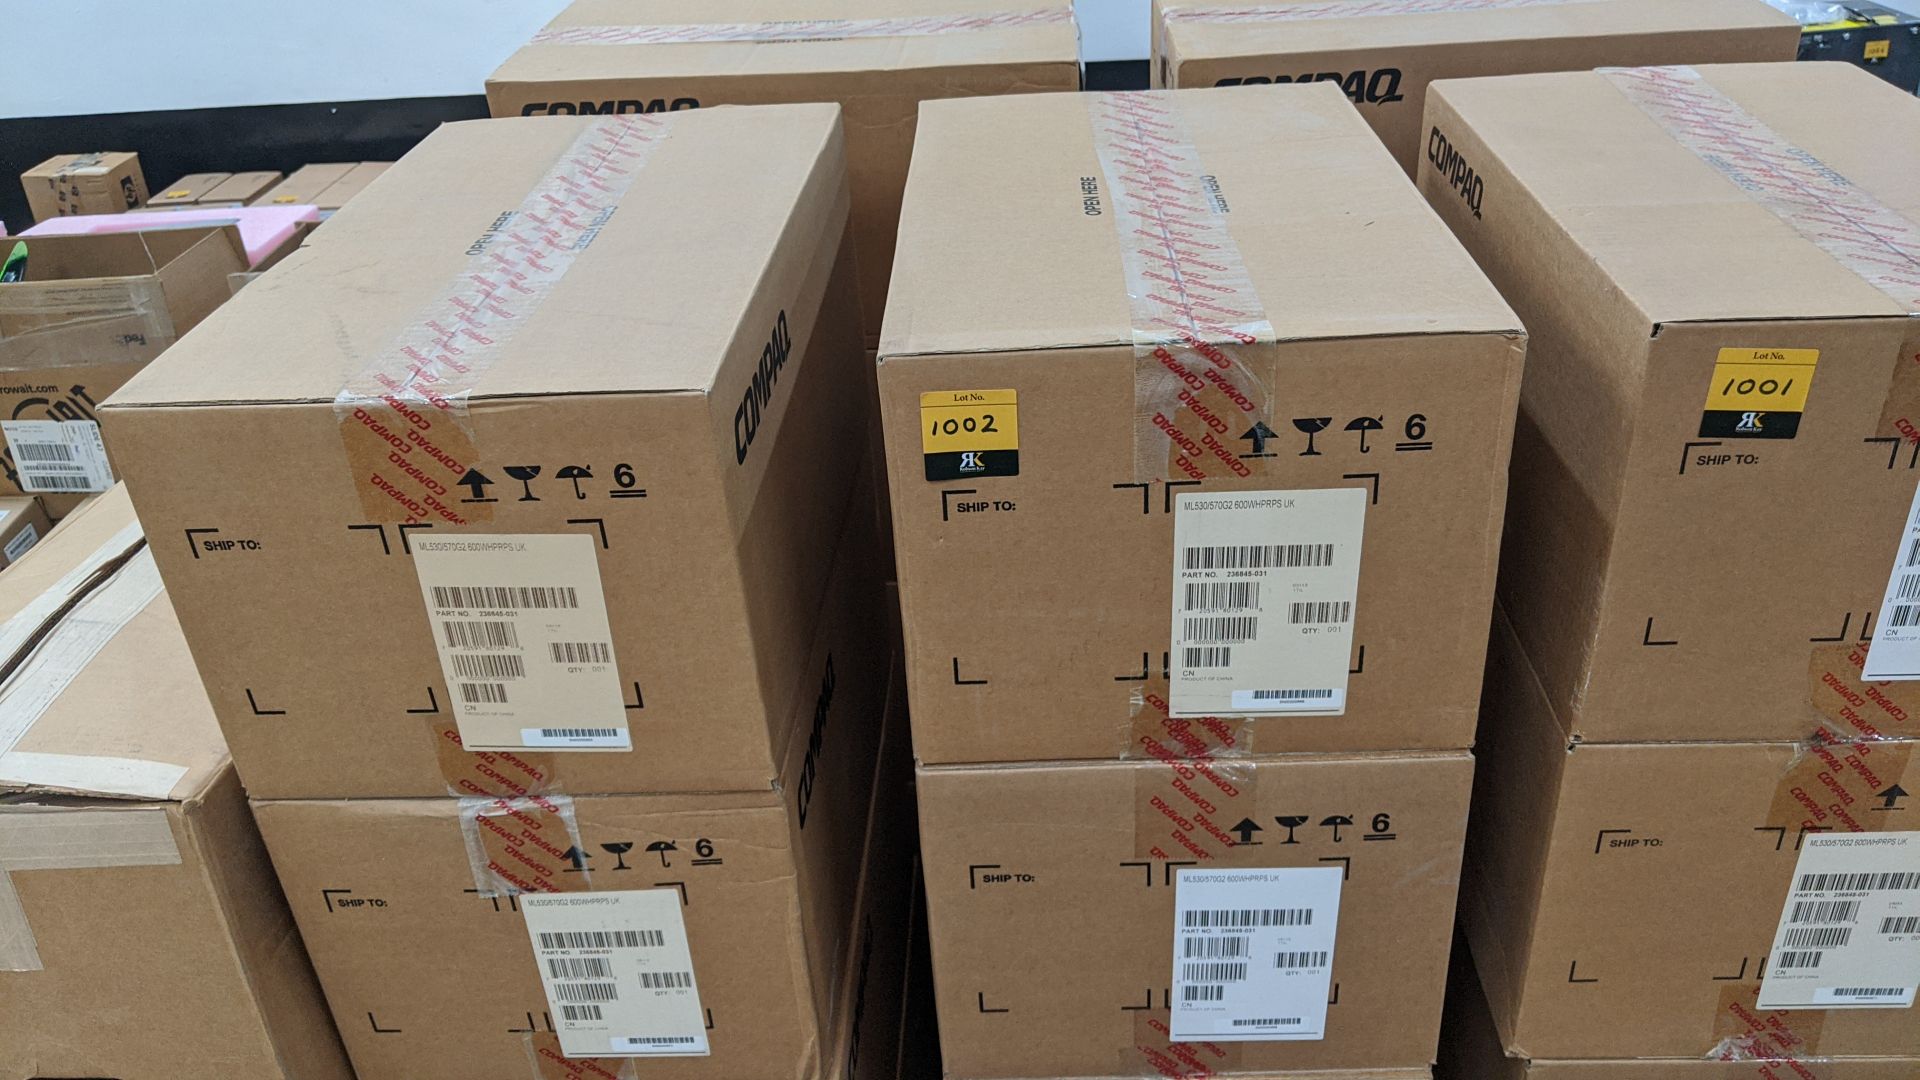 15 off Compaq redundant hot-plug power supplies for ML530/570G2 servers, individually boxed. This is